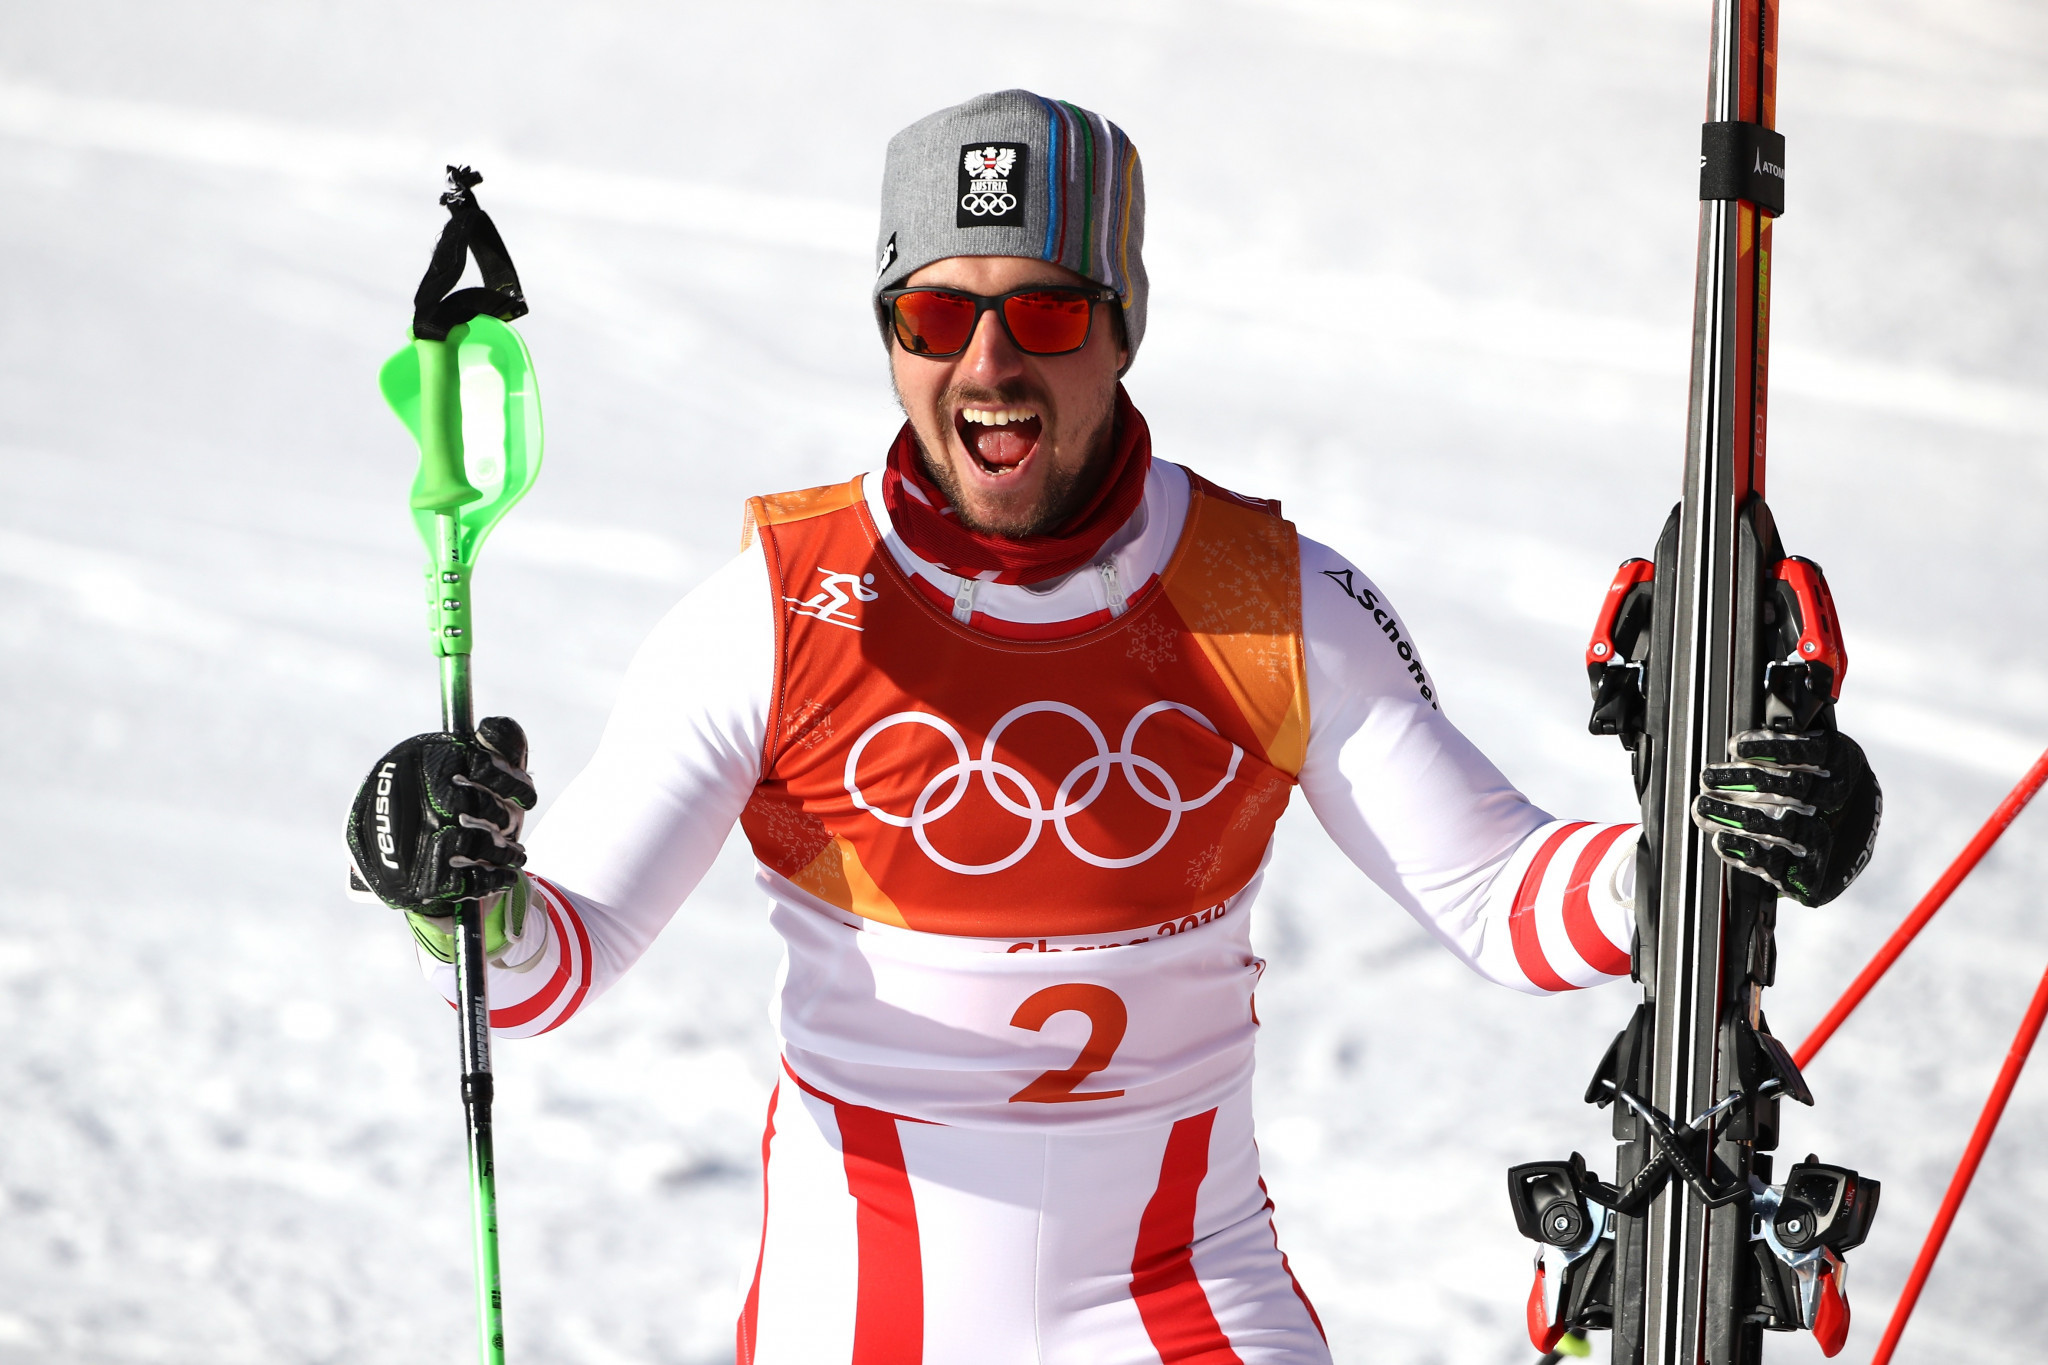 Austria’s Marcel Hirscher ended his long wait for a first Olympic gold medal by winning the men’s Alpine combined event at Pyeongchang 2018 today ©Getty Images